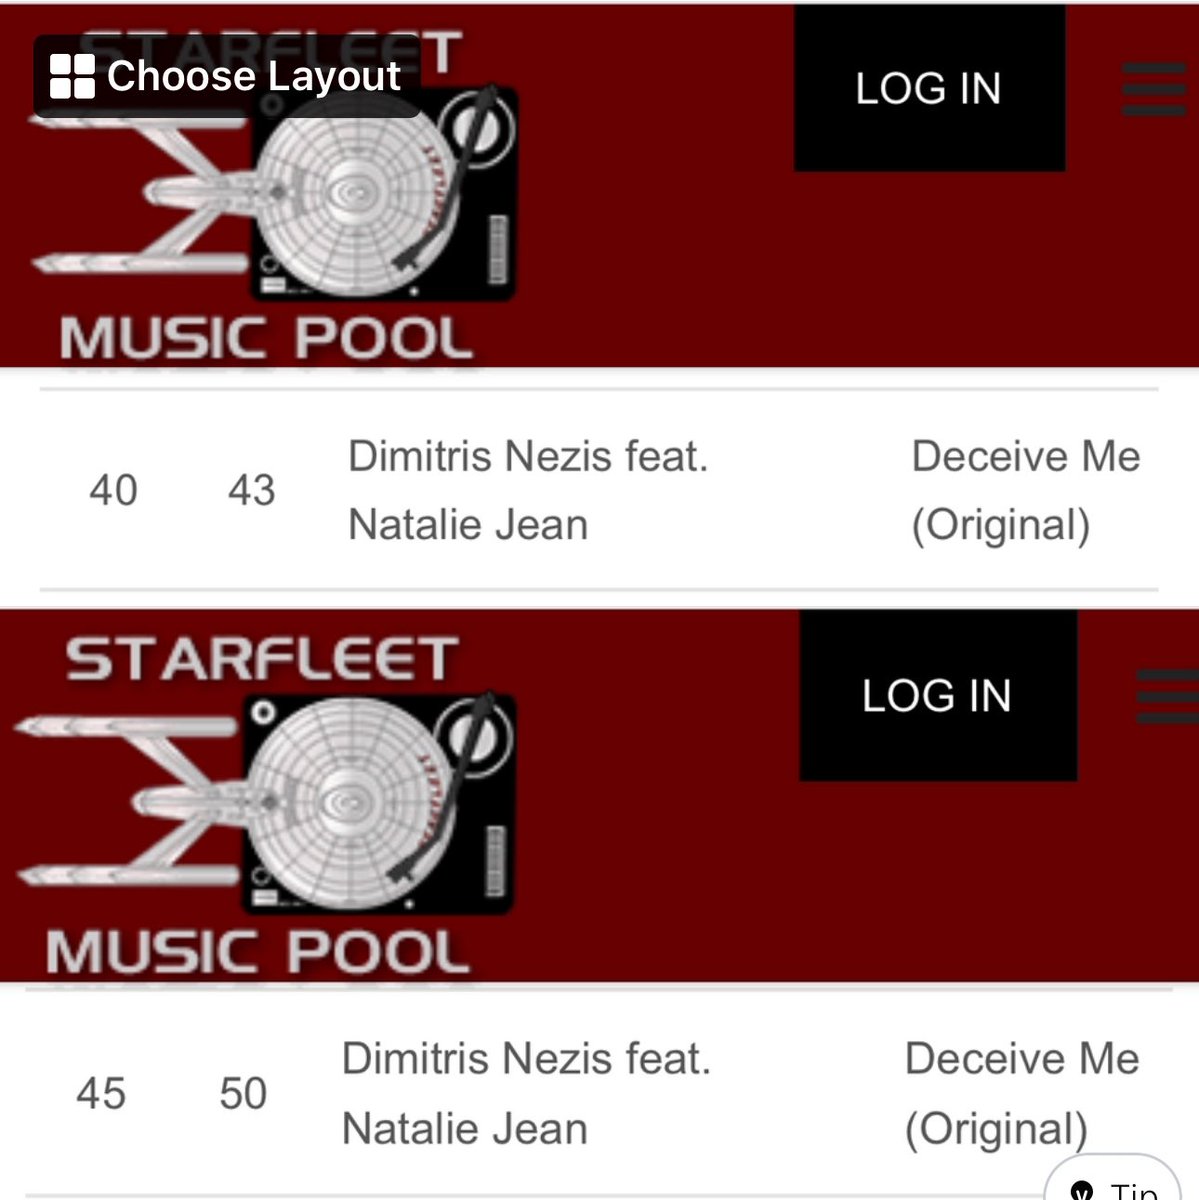 News!! Deceive Me - Dimitris Nezis featuring Natalie Jean is at 40 on the Dance Music Charts and at #45 on the Crossover Charts on starfleet Music Pool!! 😊 @dimitrisnezis